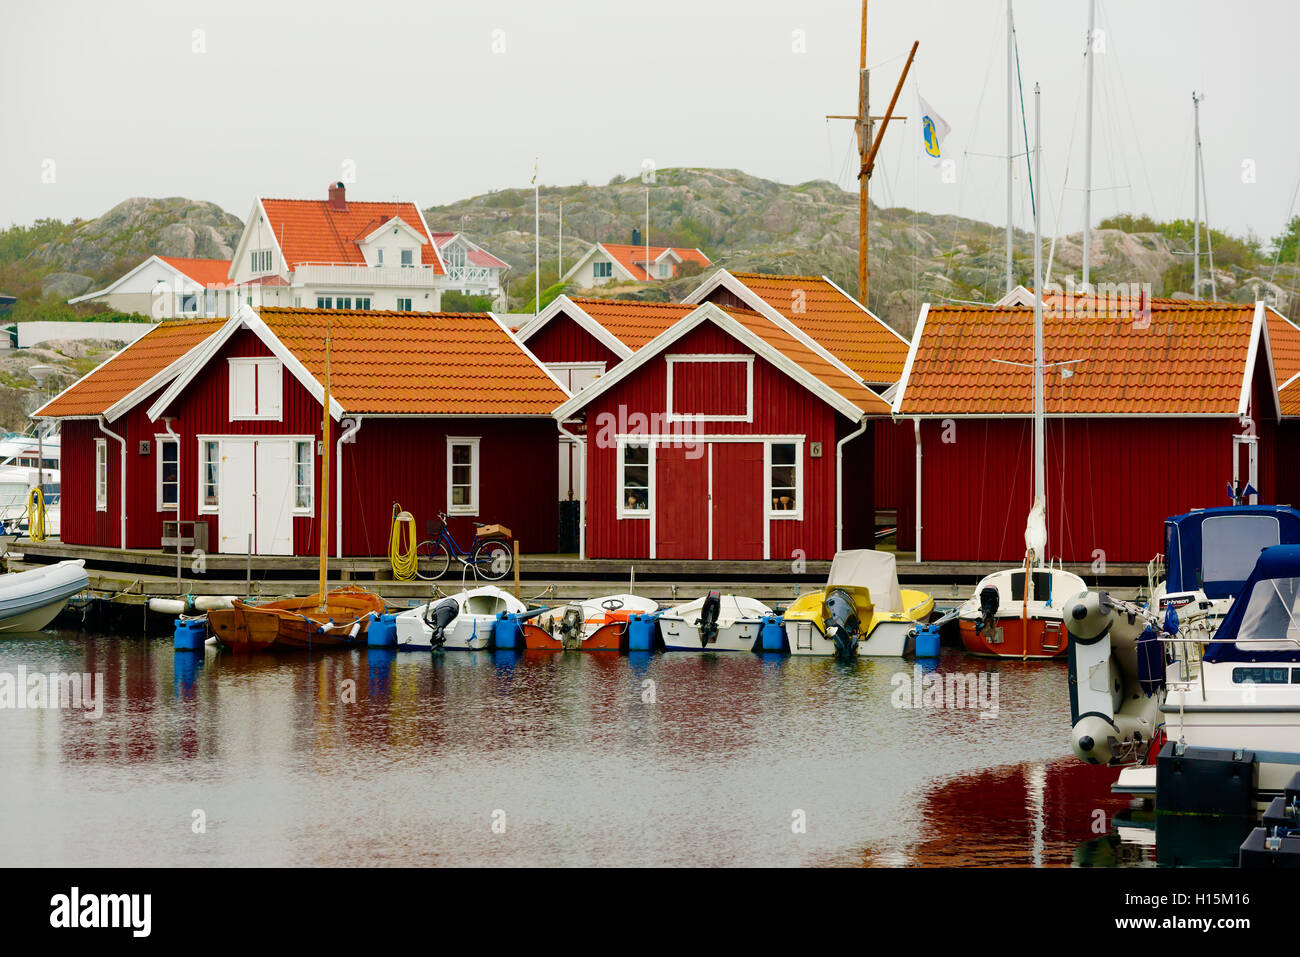 Skarhamn, Sweden - September 9, 2016: Environmental documentary of red wooden cabins in the town marina one misty morning in fal Stock Photo